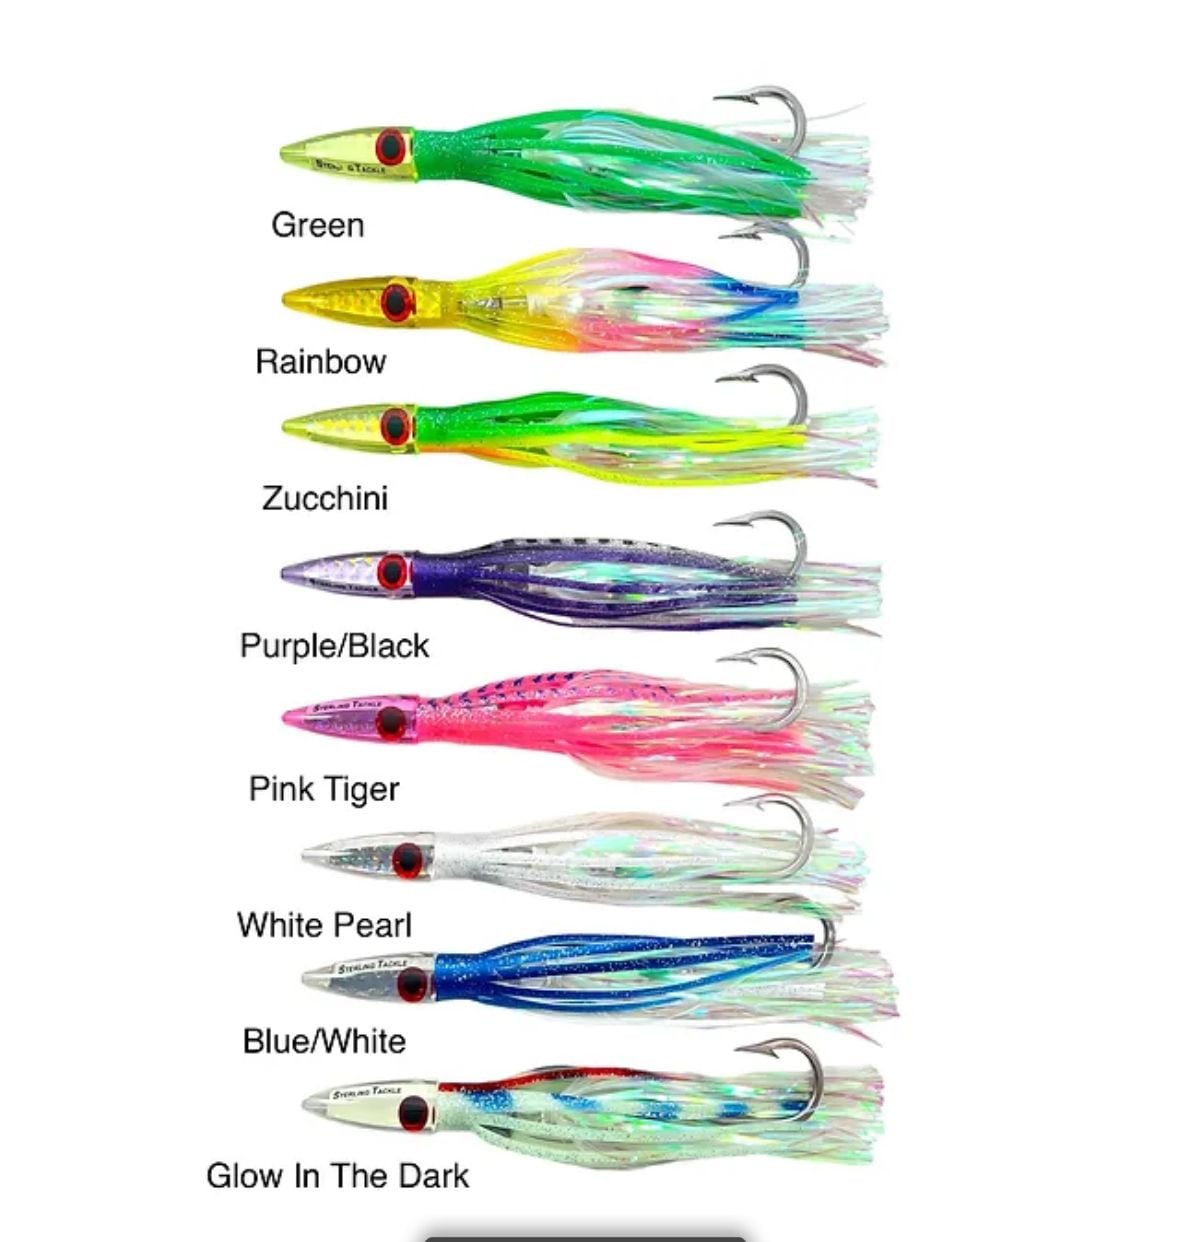 Sterling Tackle Chaos Bars - New and Improved! - Page 2 - The Hull Truth -  Boating and Fishing Forum